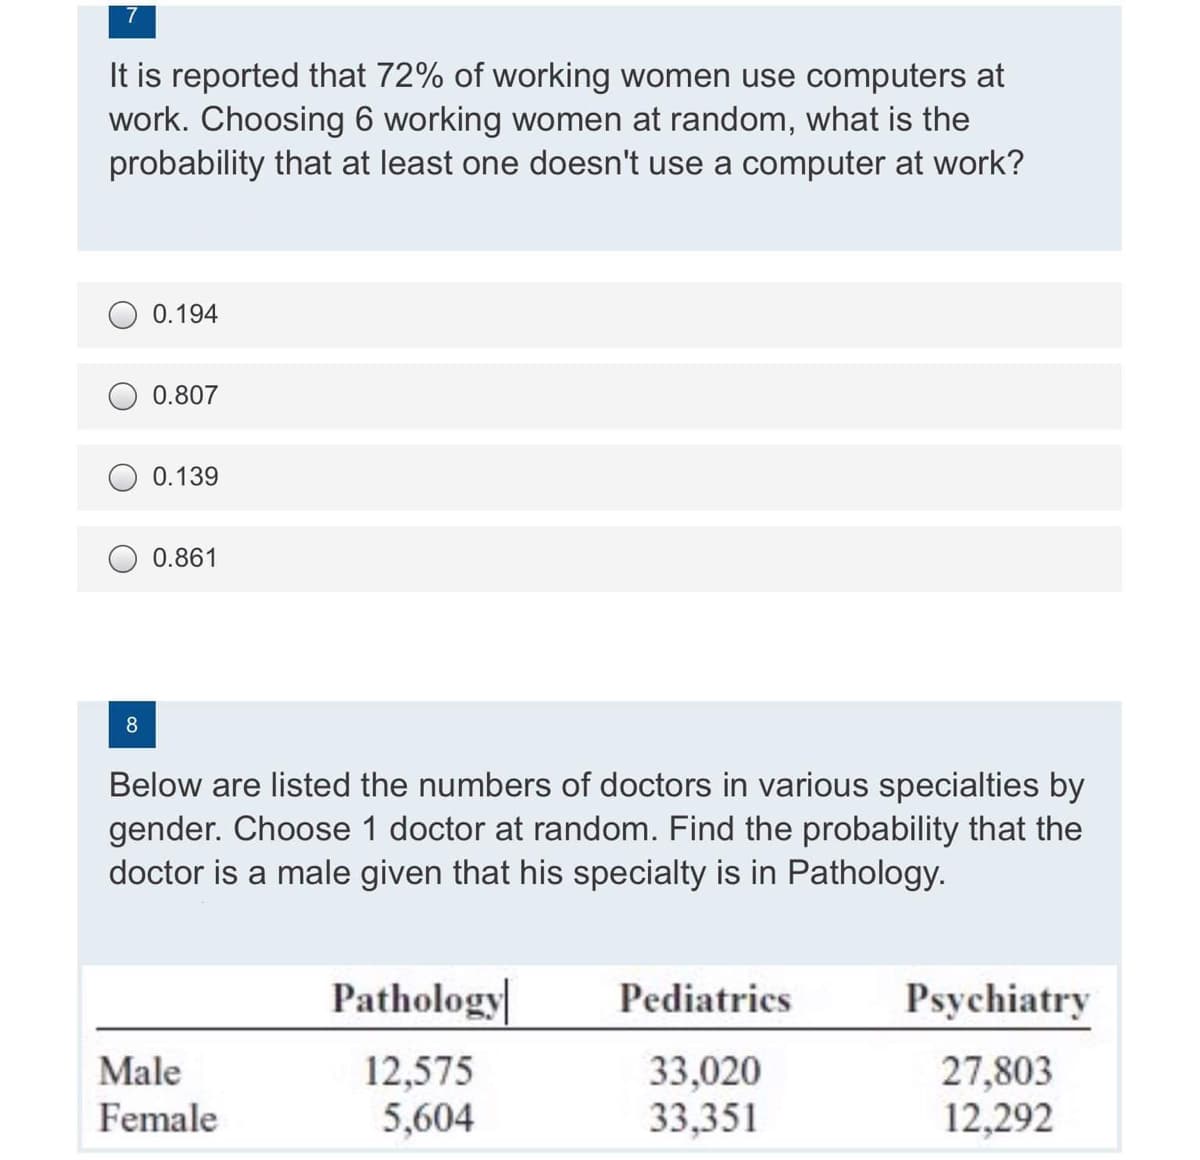 7
It is reported that 72% of working women use computers at
work. Choosing 6 working women at random, what is the
probability that at least one doesn't use a computer at work?
0.194
0.807
0.139
0.861
Below are listed the numbers of doctors in various specialties by
gender. Choose 1 doctor at random. Find the probability that the
doctor is a male given that his specialty is in Pathology.
Pathology
Pediatrics
Psychiatry
27,803
12,292
Male
12,575
5,604
33,020
33,351
Female
